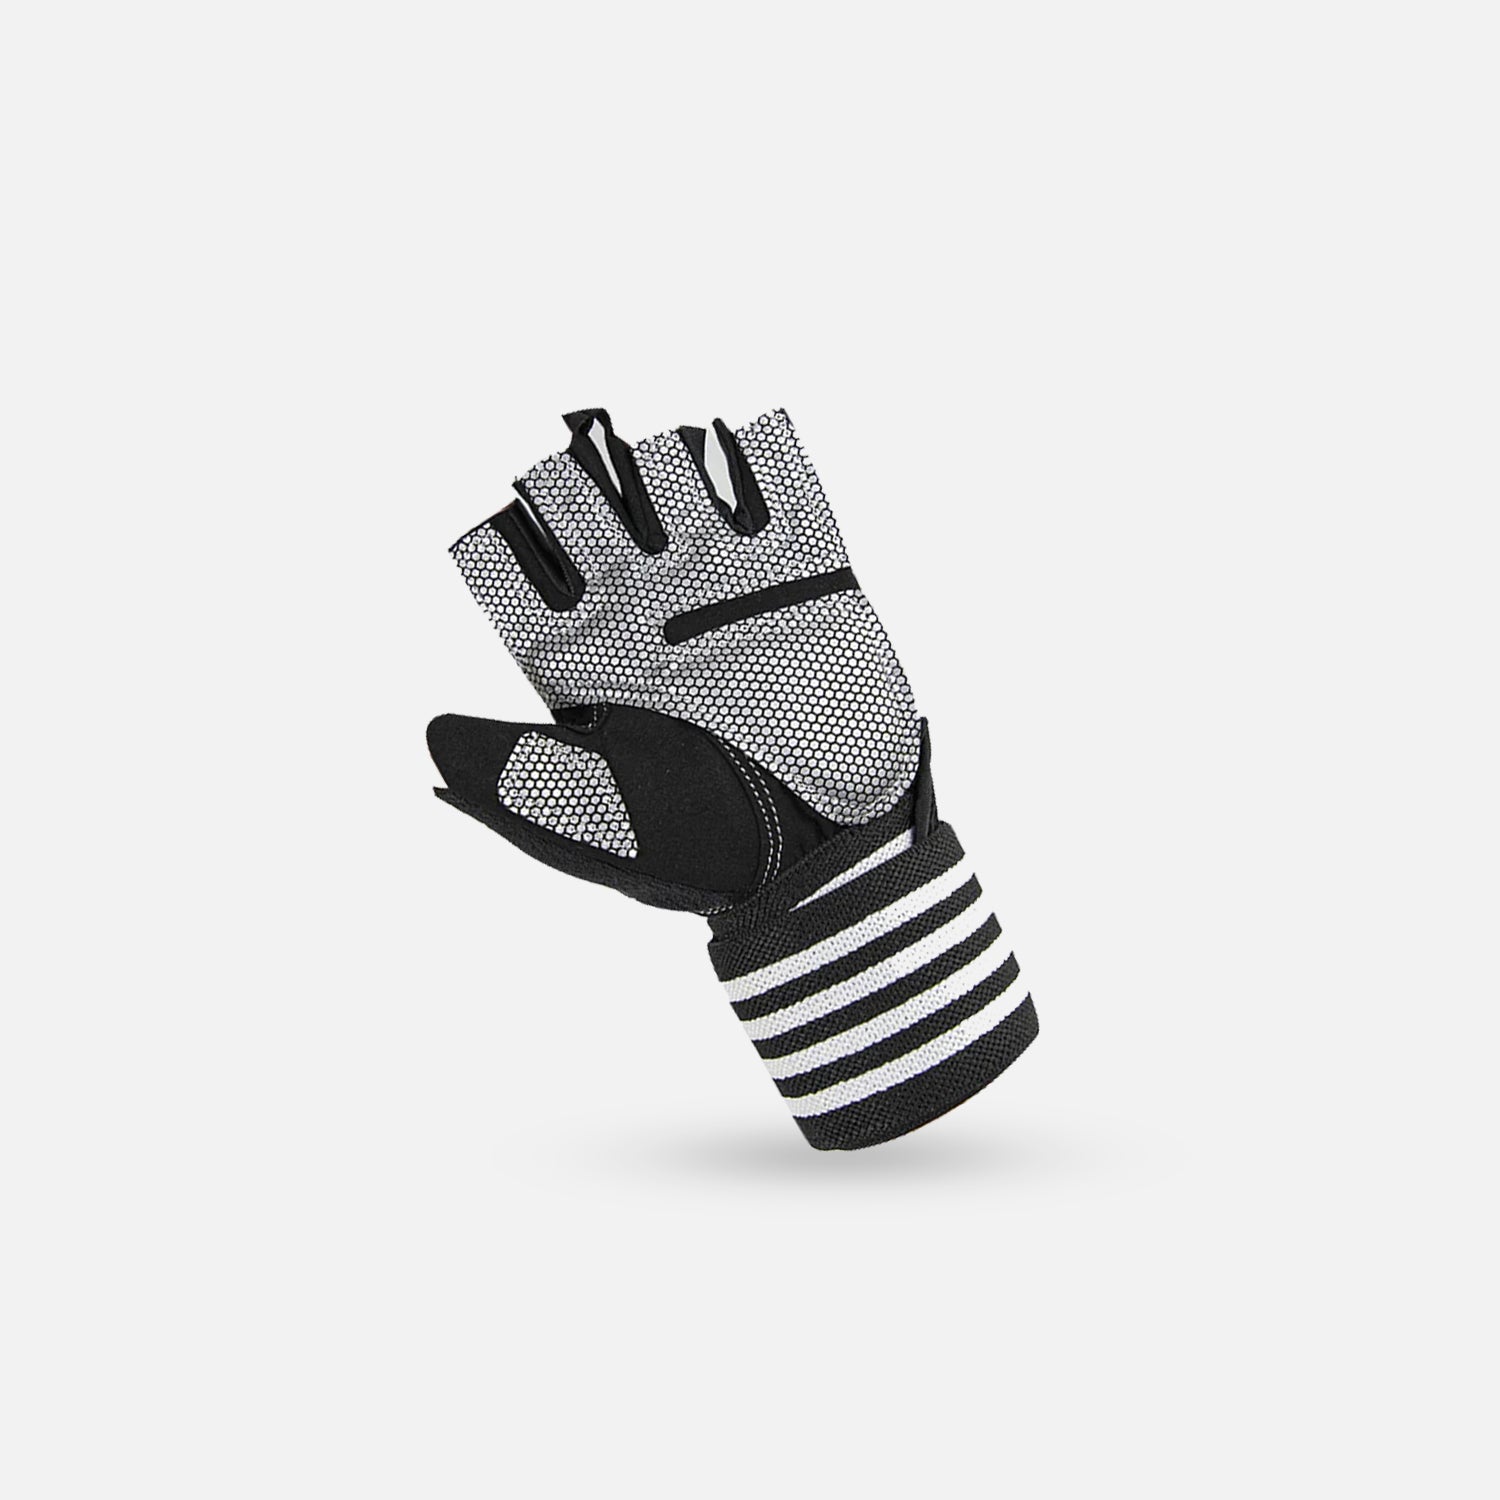 Gym & Fitness Gloves with Wrist Support - Grey